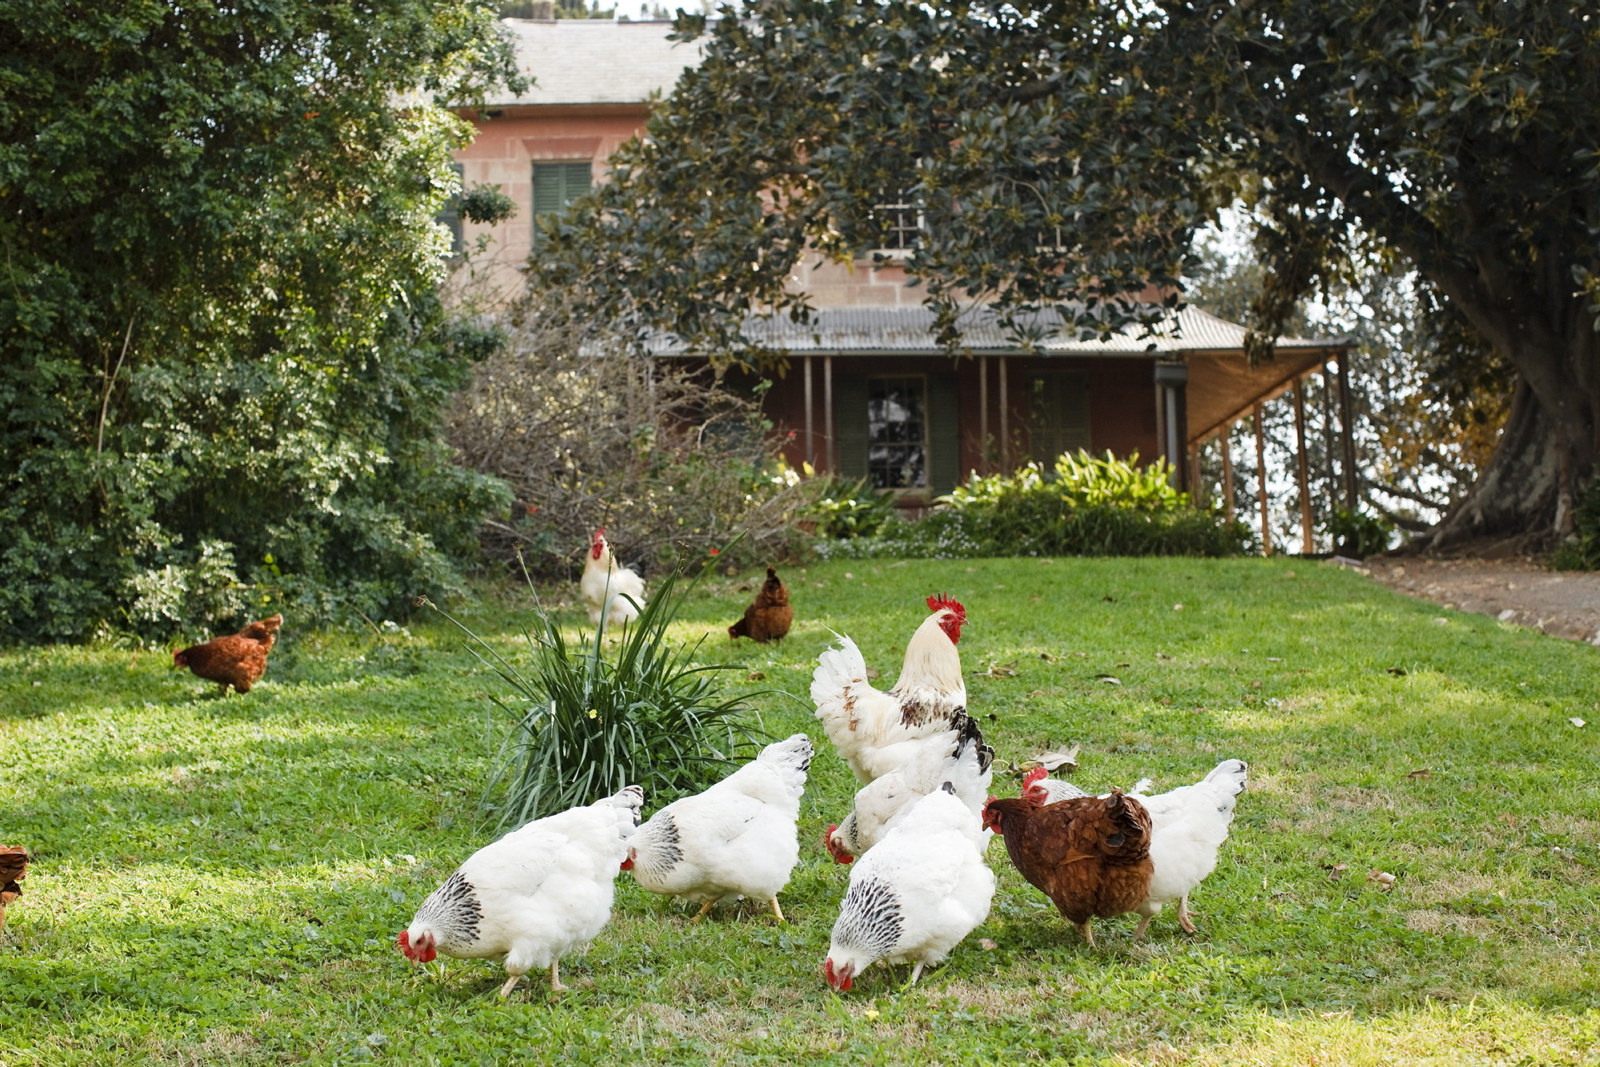 Outside view of the Main House at Rouse Hill House and Farm. Group of chickens in the garden